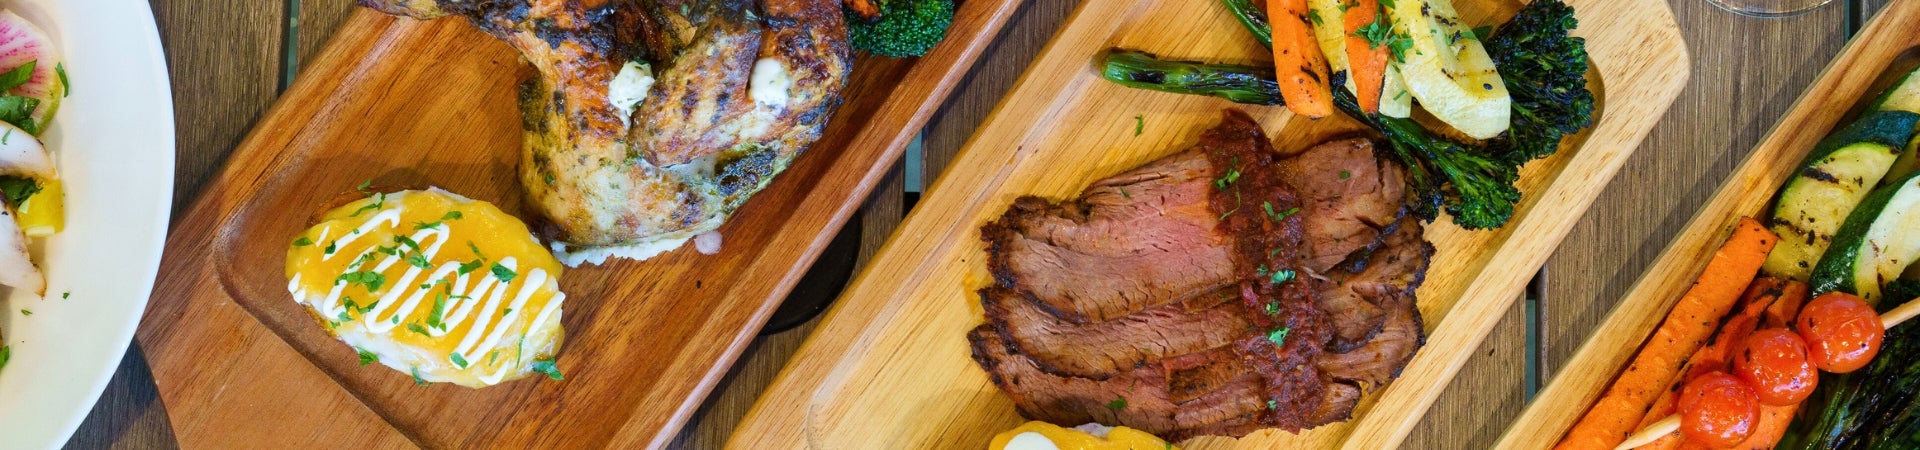 The Stable food on cutting boards